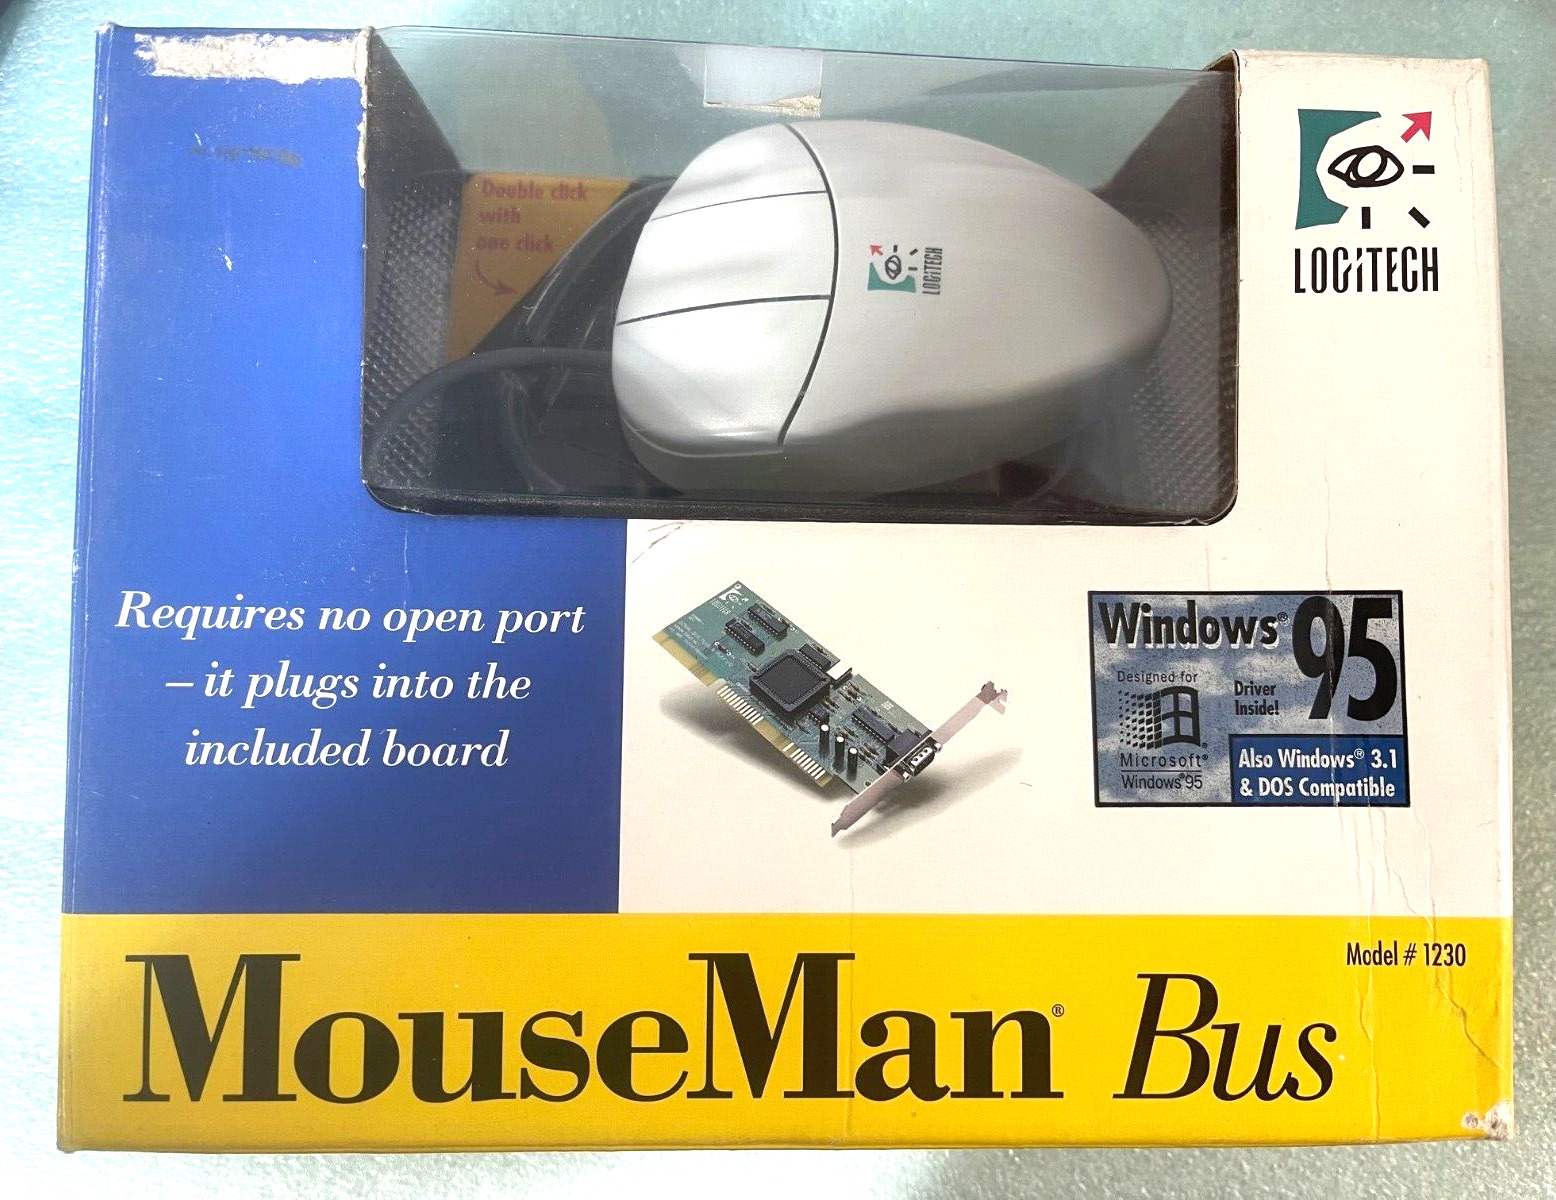 NEW IN OLD BOX RARE LOGITECH MOUSEMAN BUS RETAIL MOUSE & ISA BUS CARD RM3WL